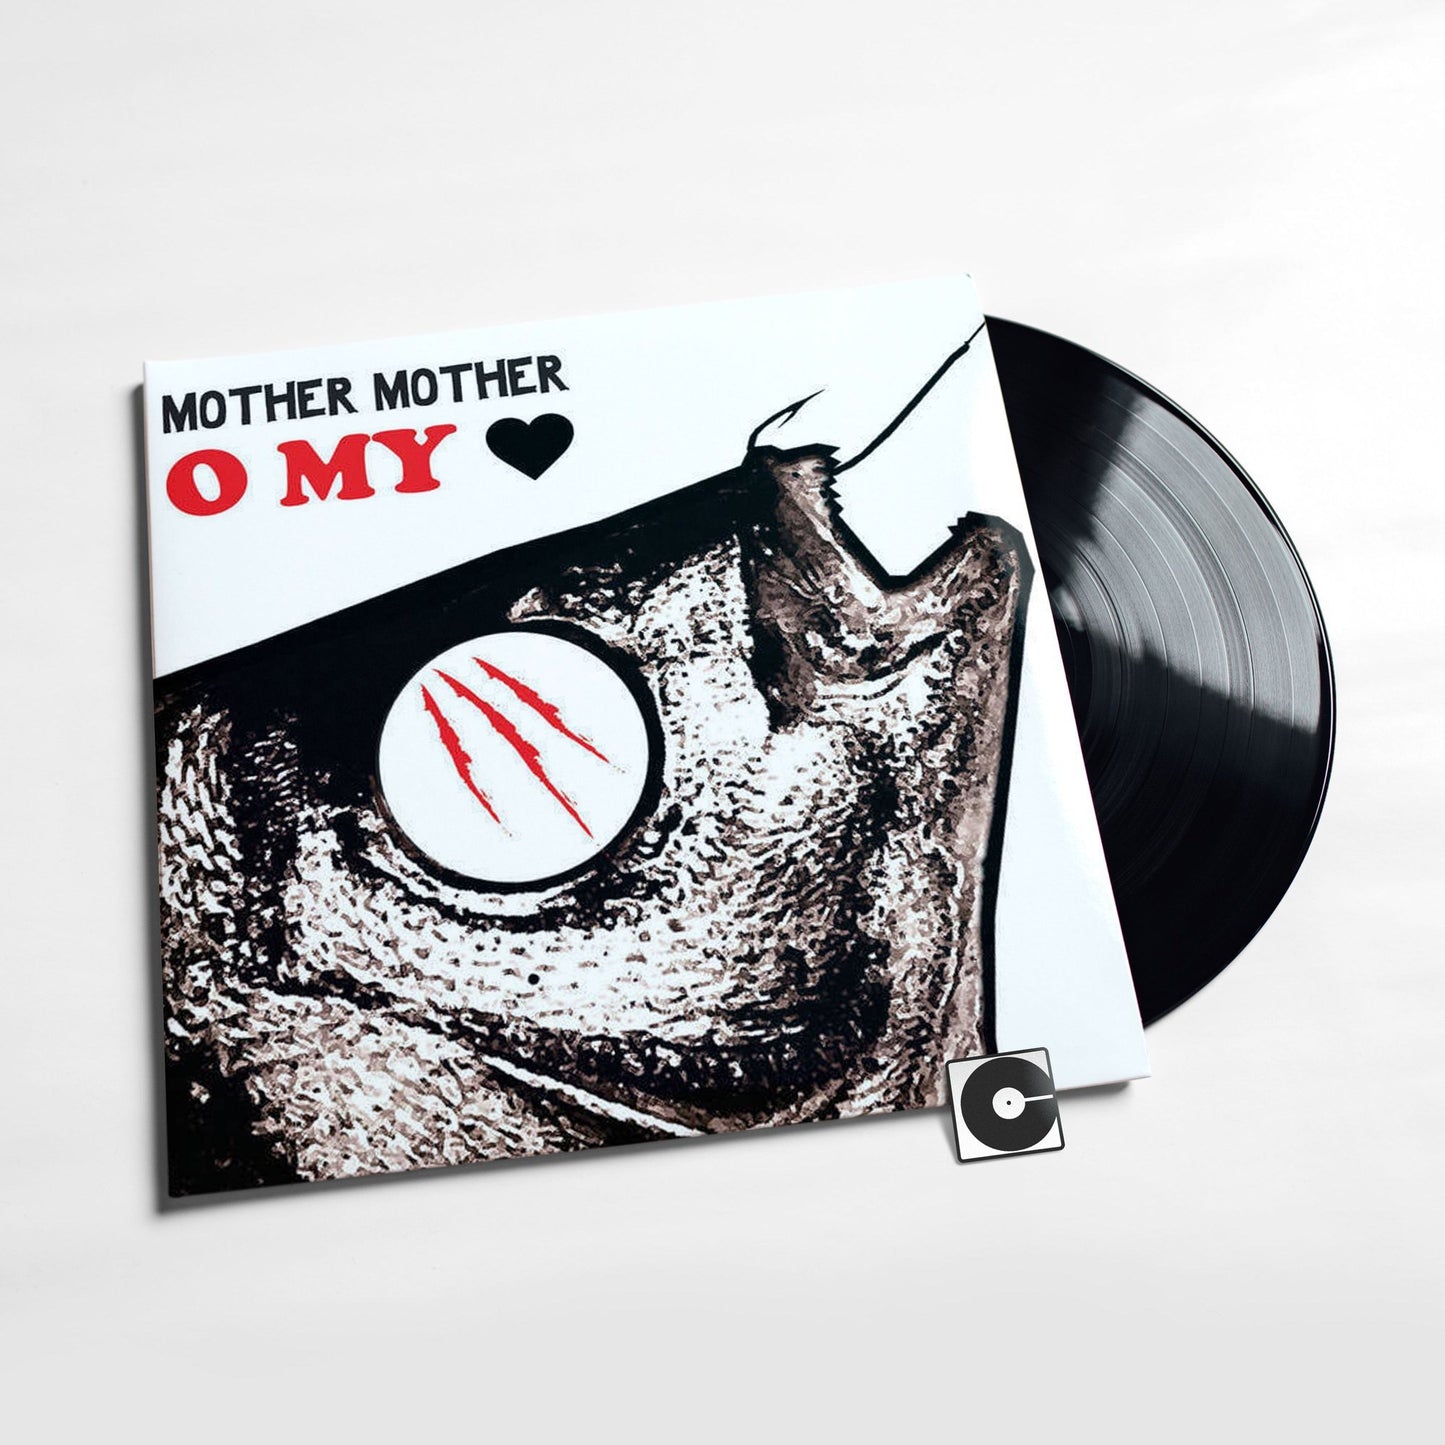 Mother Mother - "O My Heart"